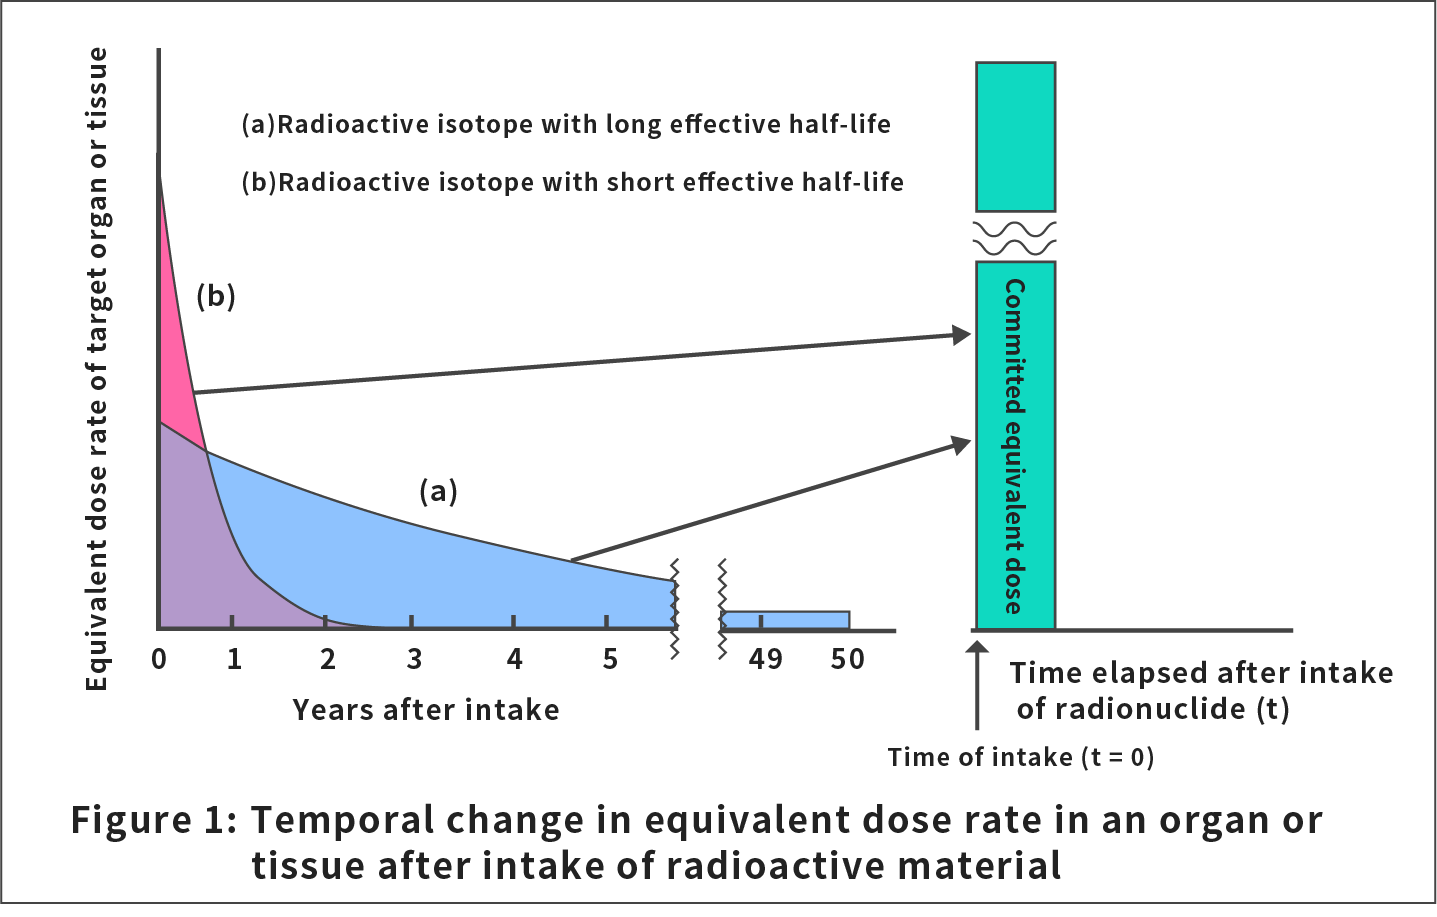 Figure 1: Temporal change in equivalent dose rate in an organ or tissue after intake of radioactive material